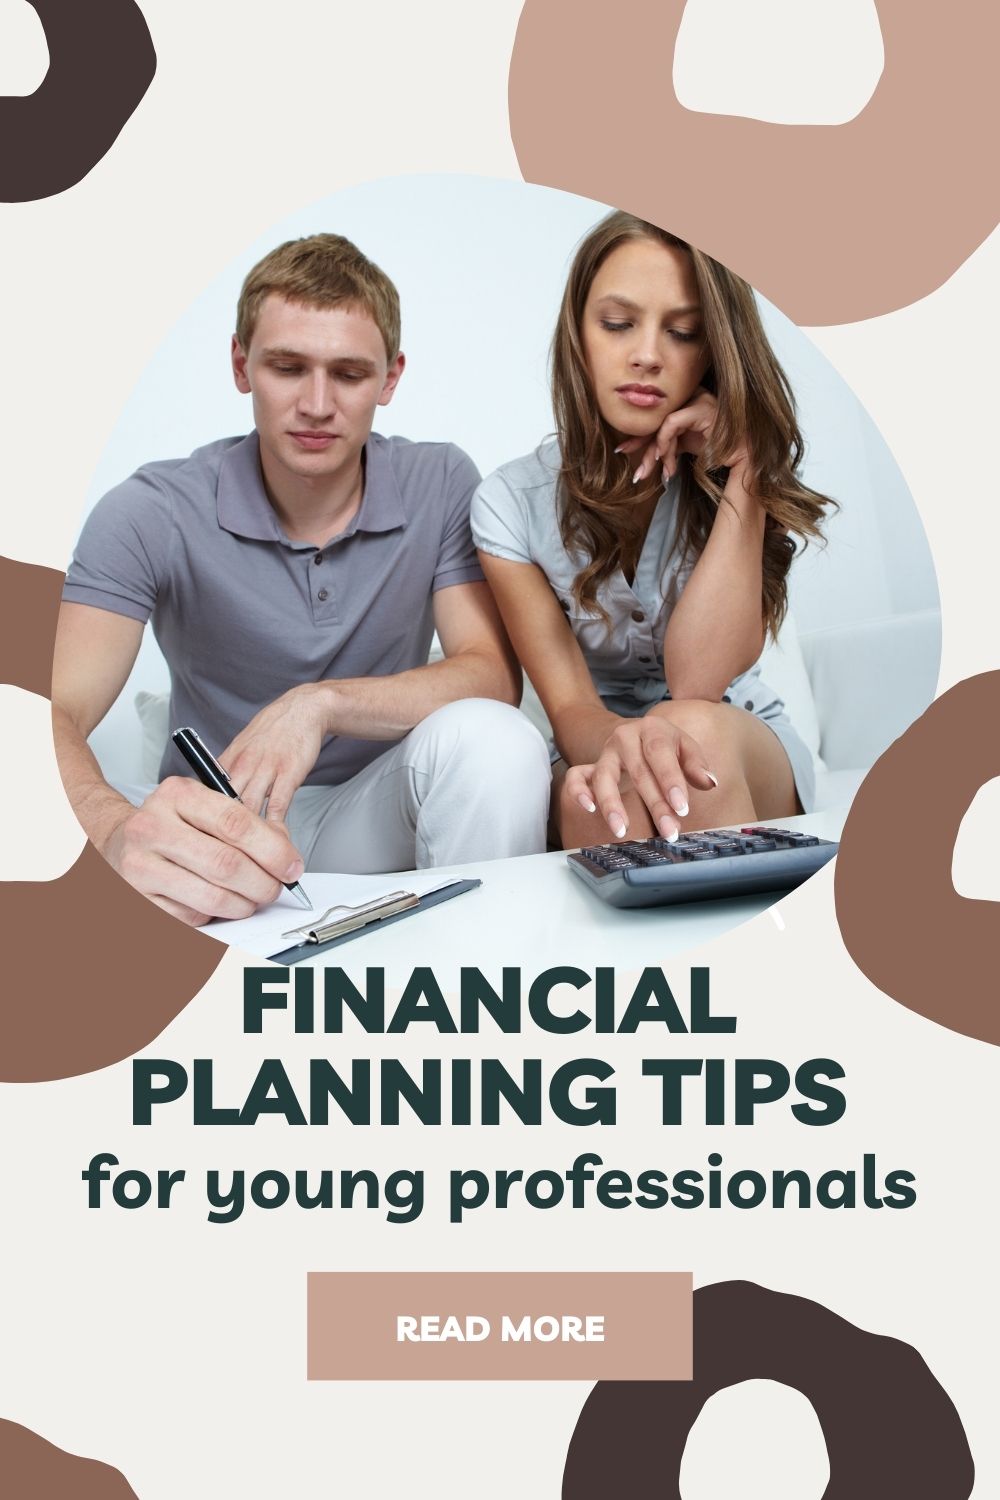 Essential financial tips for young professionals: goal-setting, wise budgeting, emergency savings, debt management, retirement planning, and smart investing for a secure future.